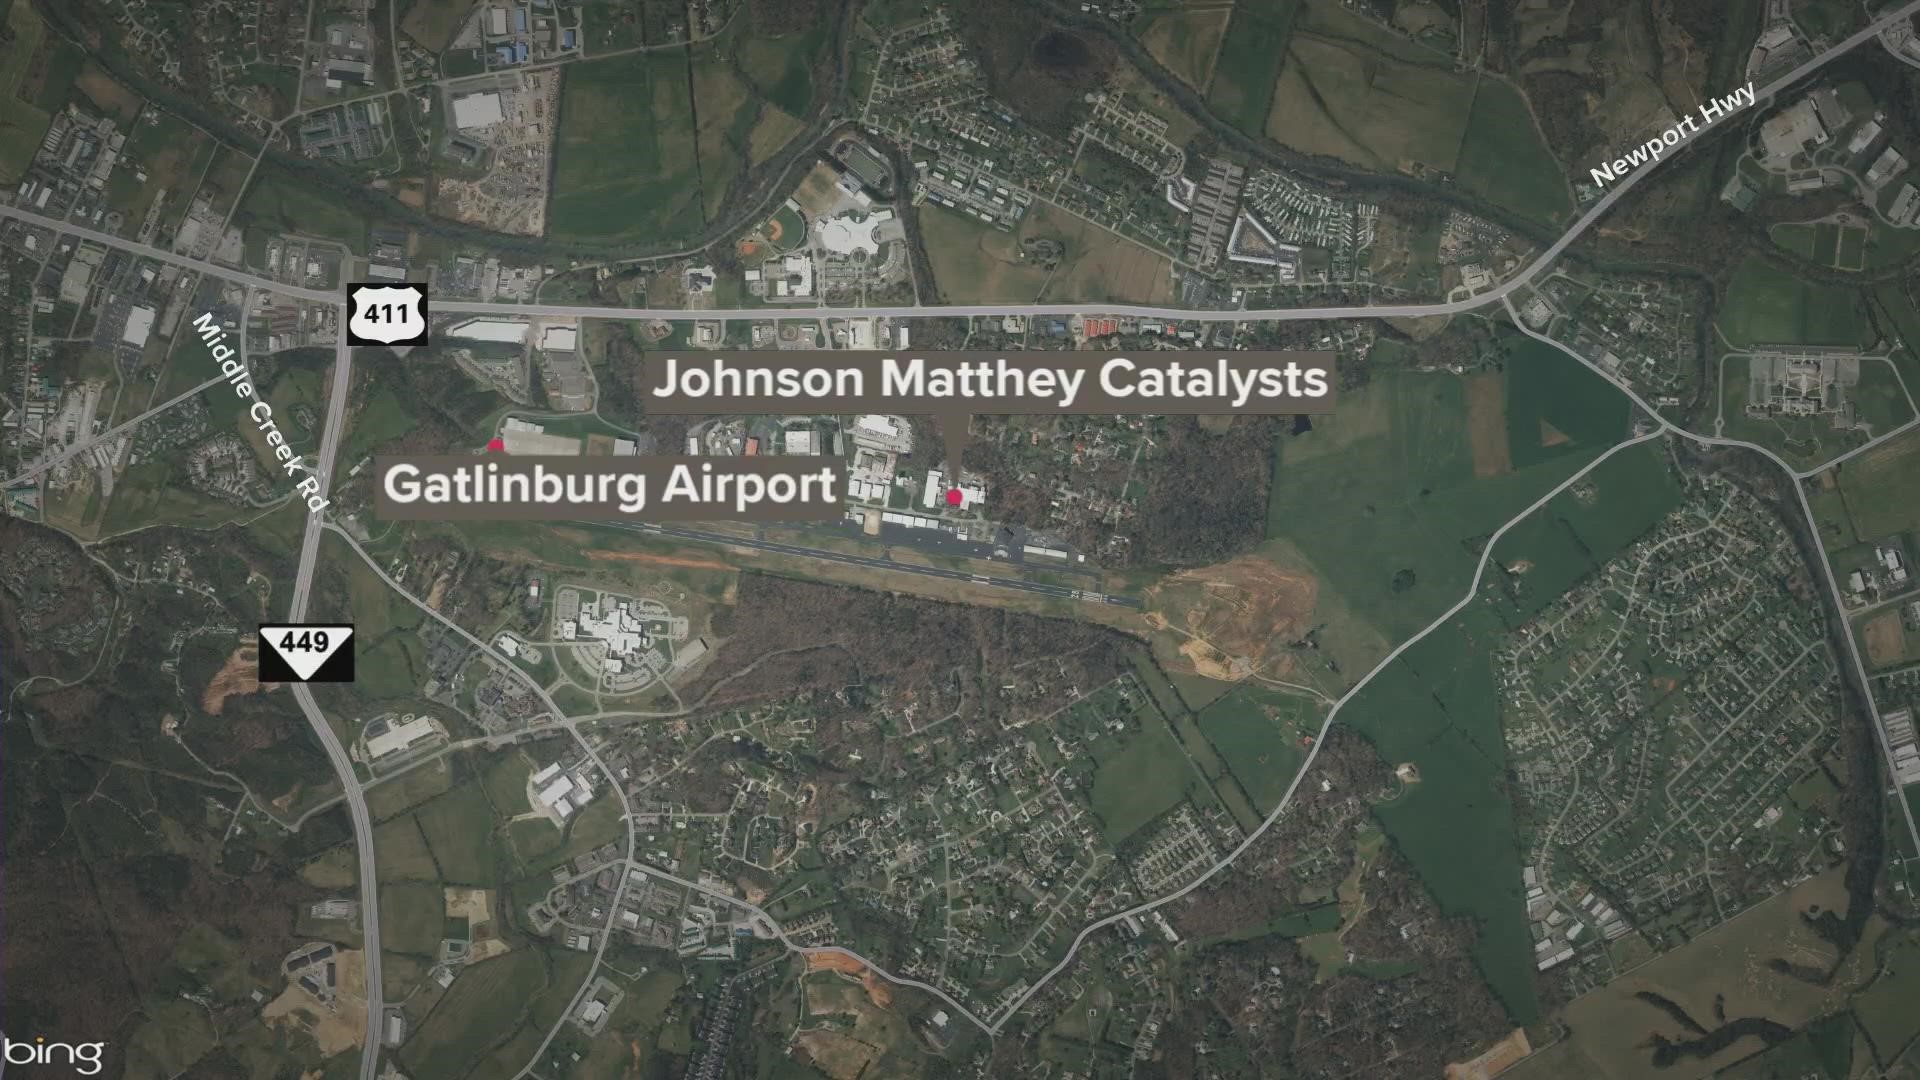 The explosion occurred in July at Johnson Matthey Catalysts on Airport Road.